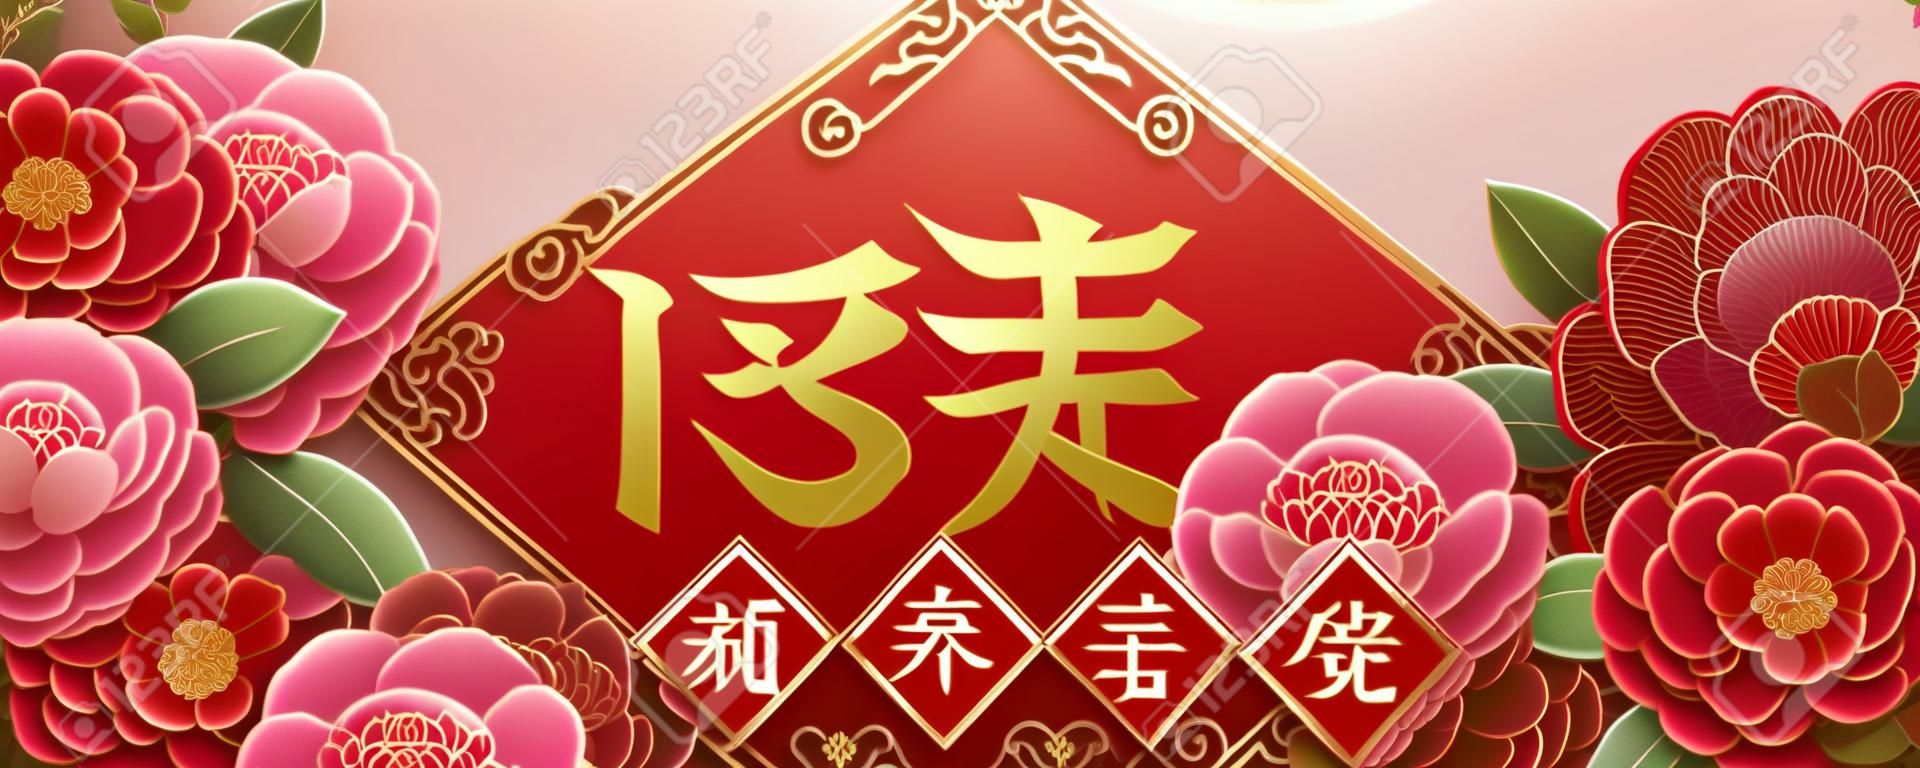 Lunar year design with beautiful peony flowers, Spring written in Chinese word in the middle